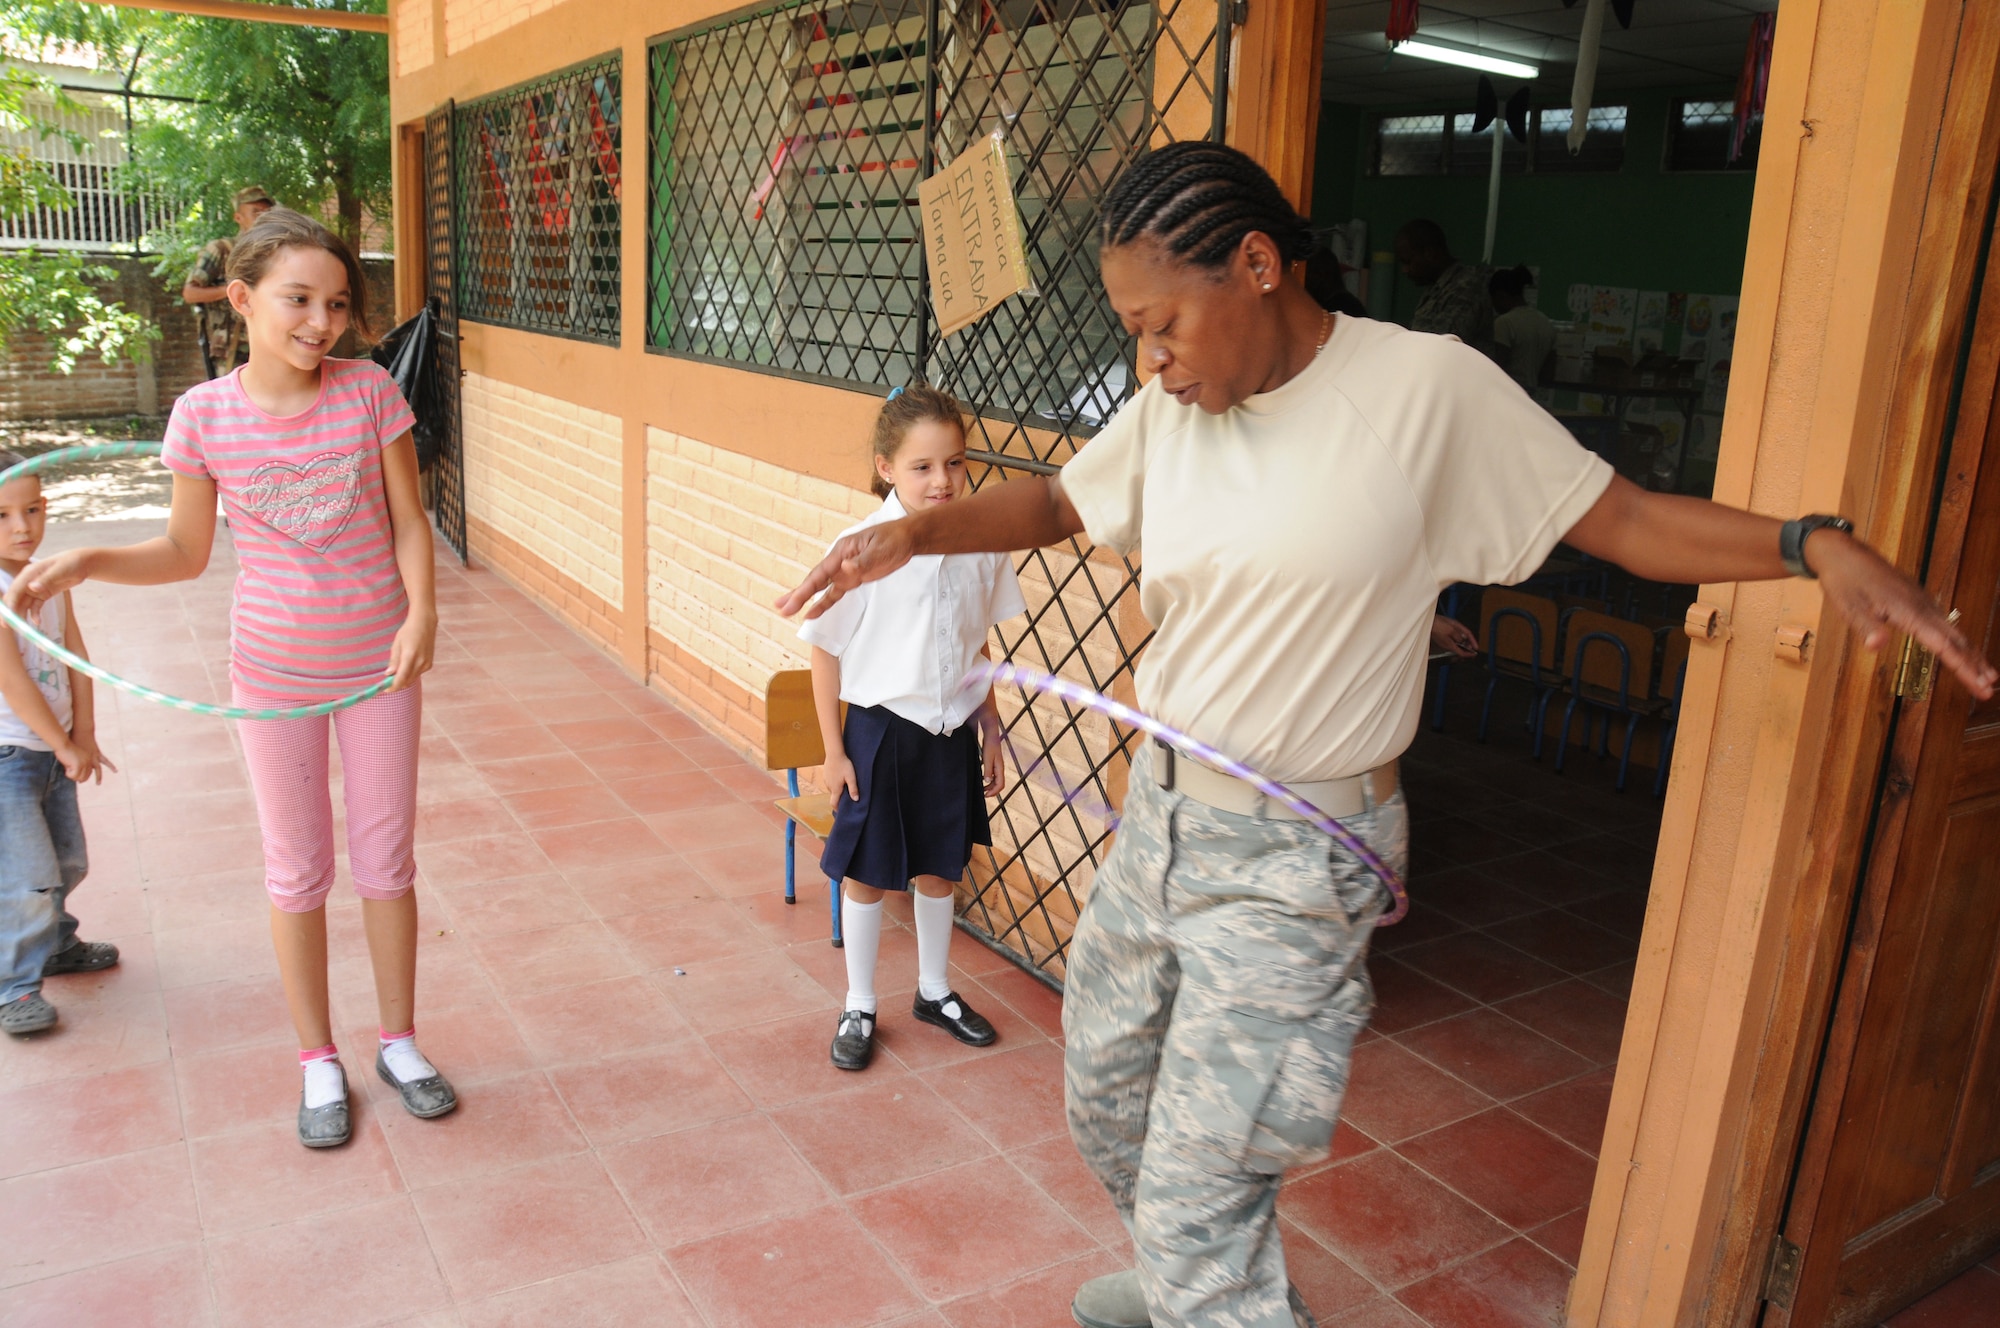 Master Sgt. Julia McKenzie, first sergeant for the 916th Aerospace Medicine Squadron in North Carolina, demonstrates proper hula-hooping technique to some local children here Aug. 8, 2011. McKenzie led an effort to collect hundreds of donated toys that were given to young patients here during the unit’s Medical Readiness Training Exercise, or MEDRETE. (USAF photo by Senior Airman Meredith A. H. Thomas, 916 ARW/PA)